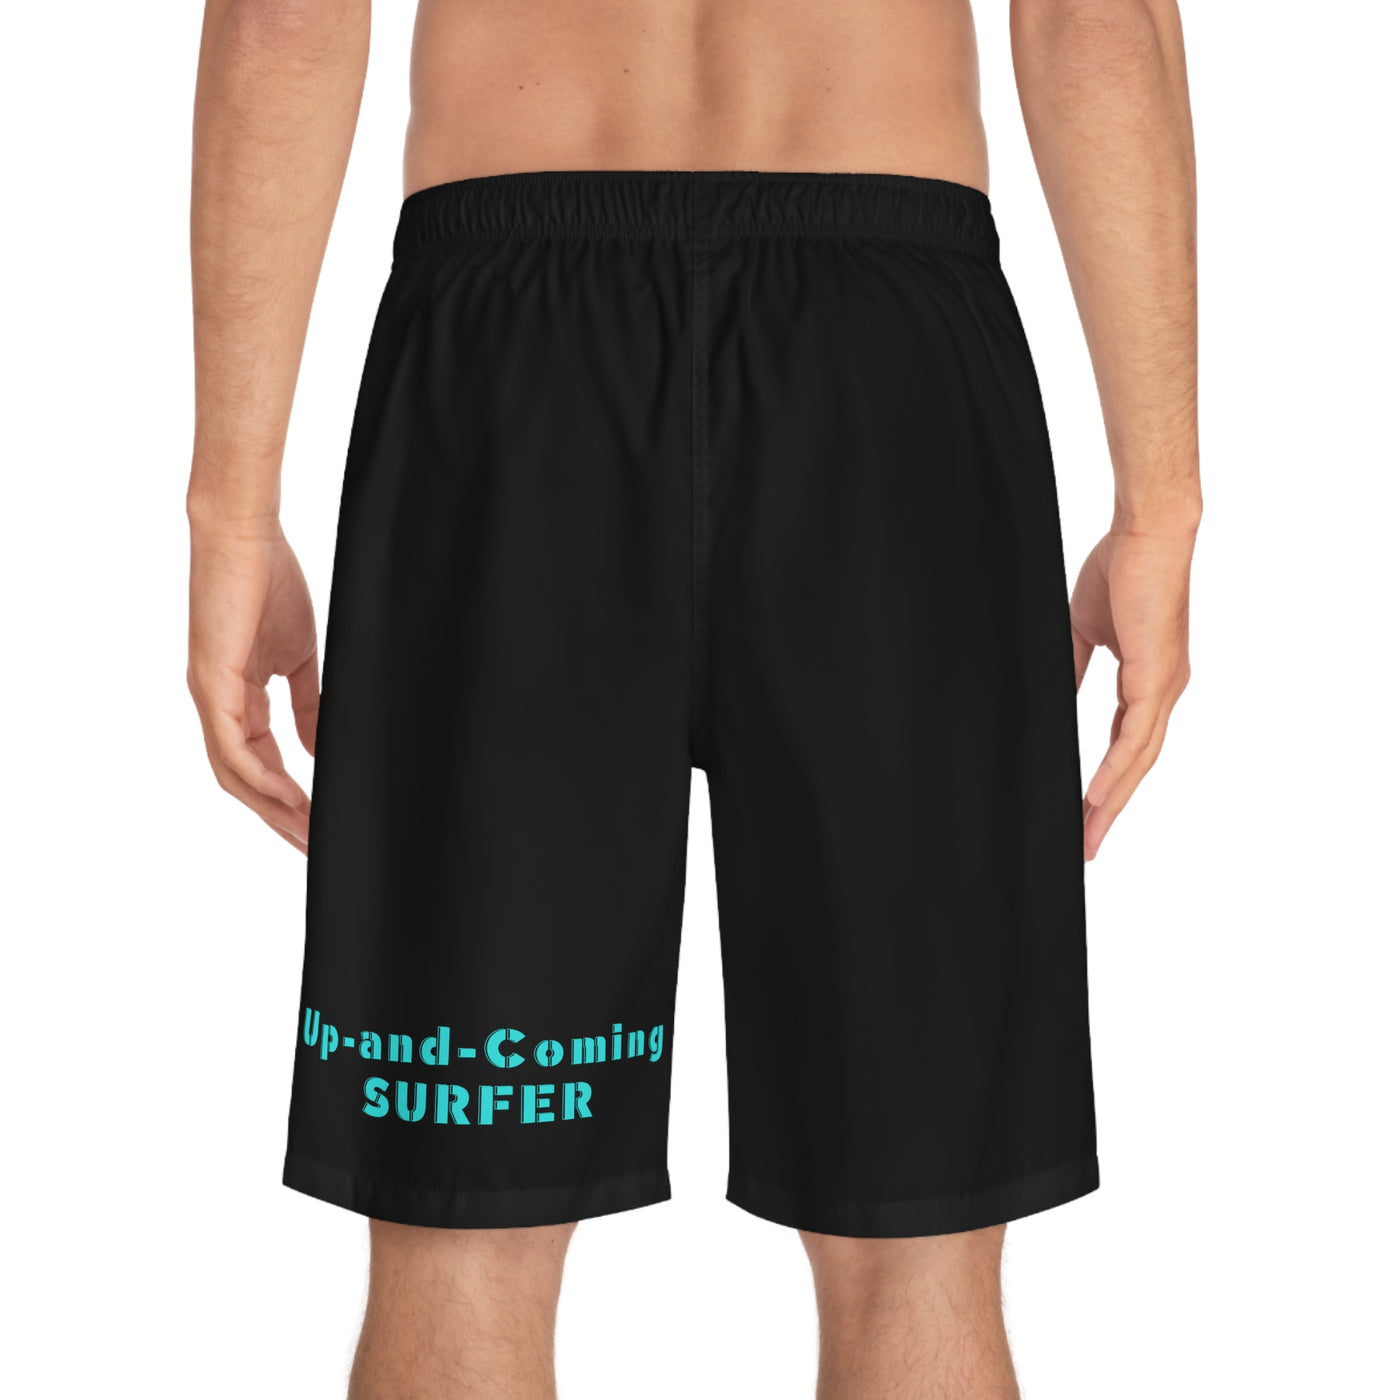 UP AND COMING SURFER Men's Board Shorts